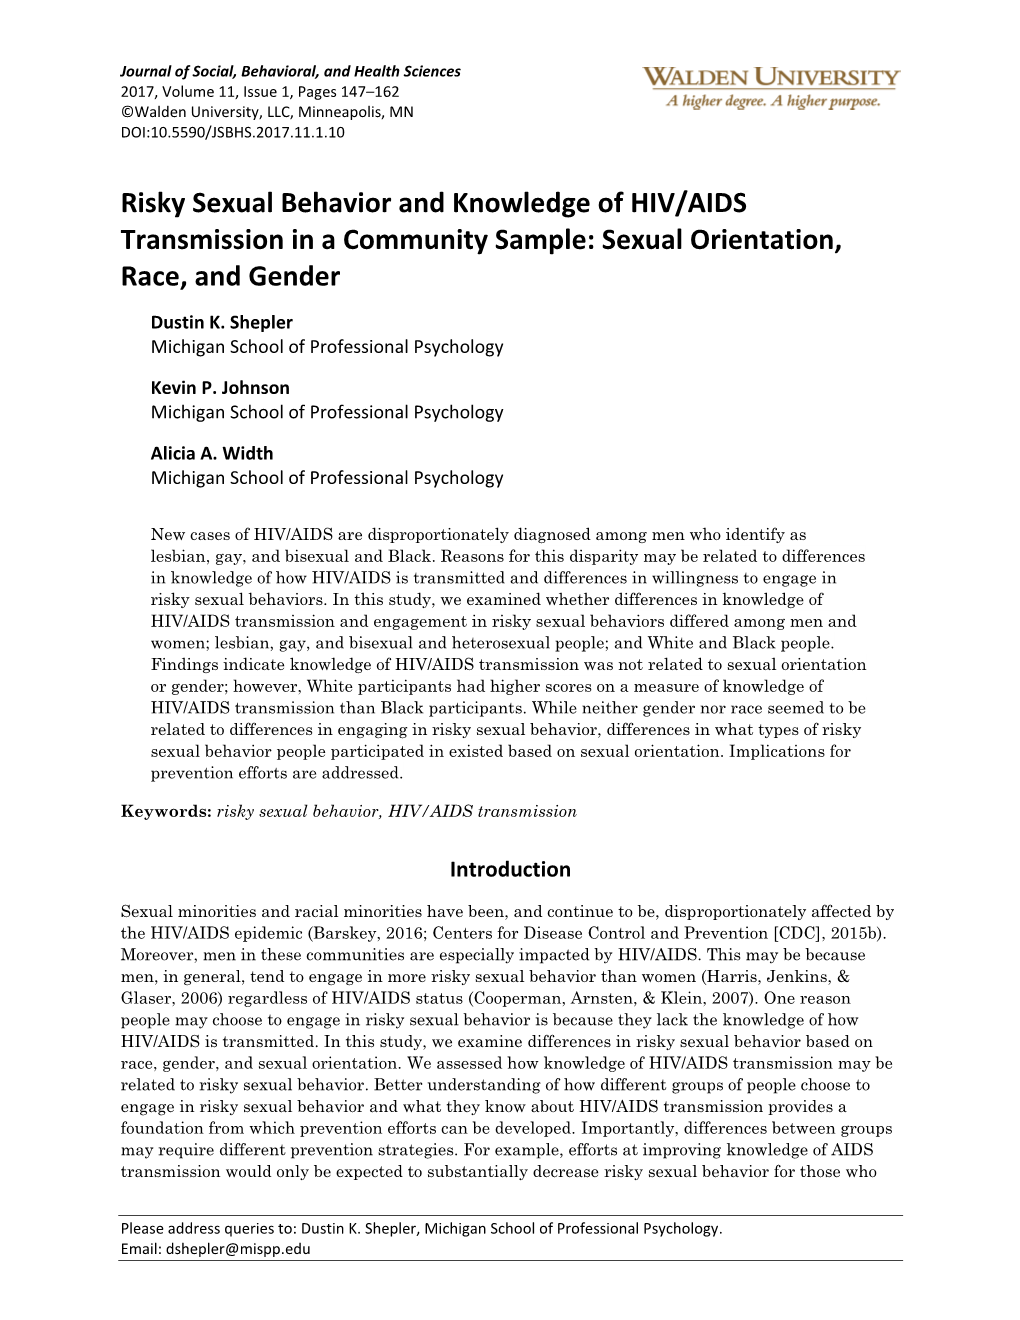 Risky Sexual Behavior and Knowledge of HIV/AIDS Transmission in a Community Sample: Sexual Orientation, Race, and Gender